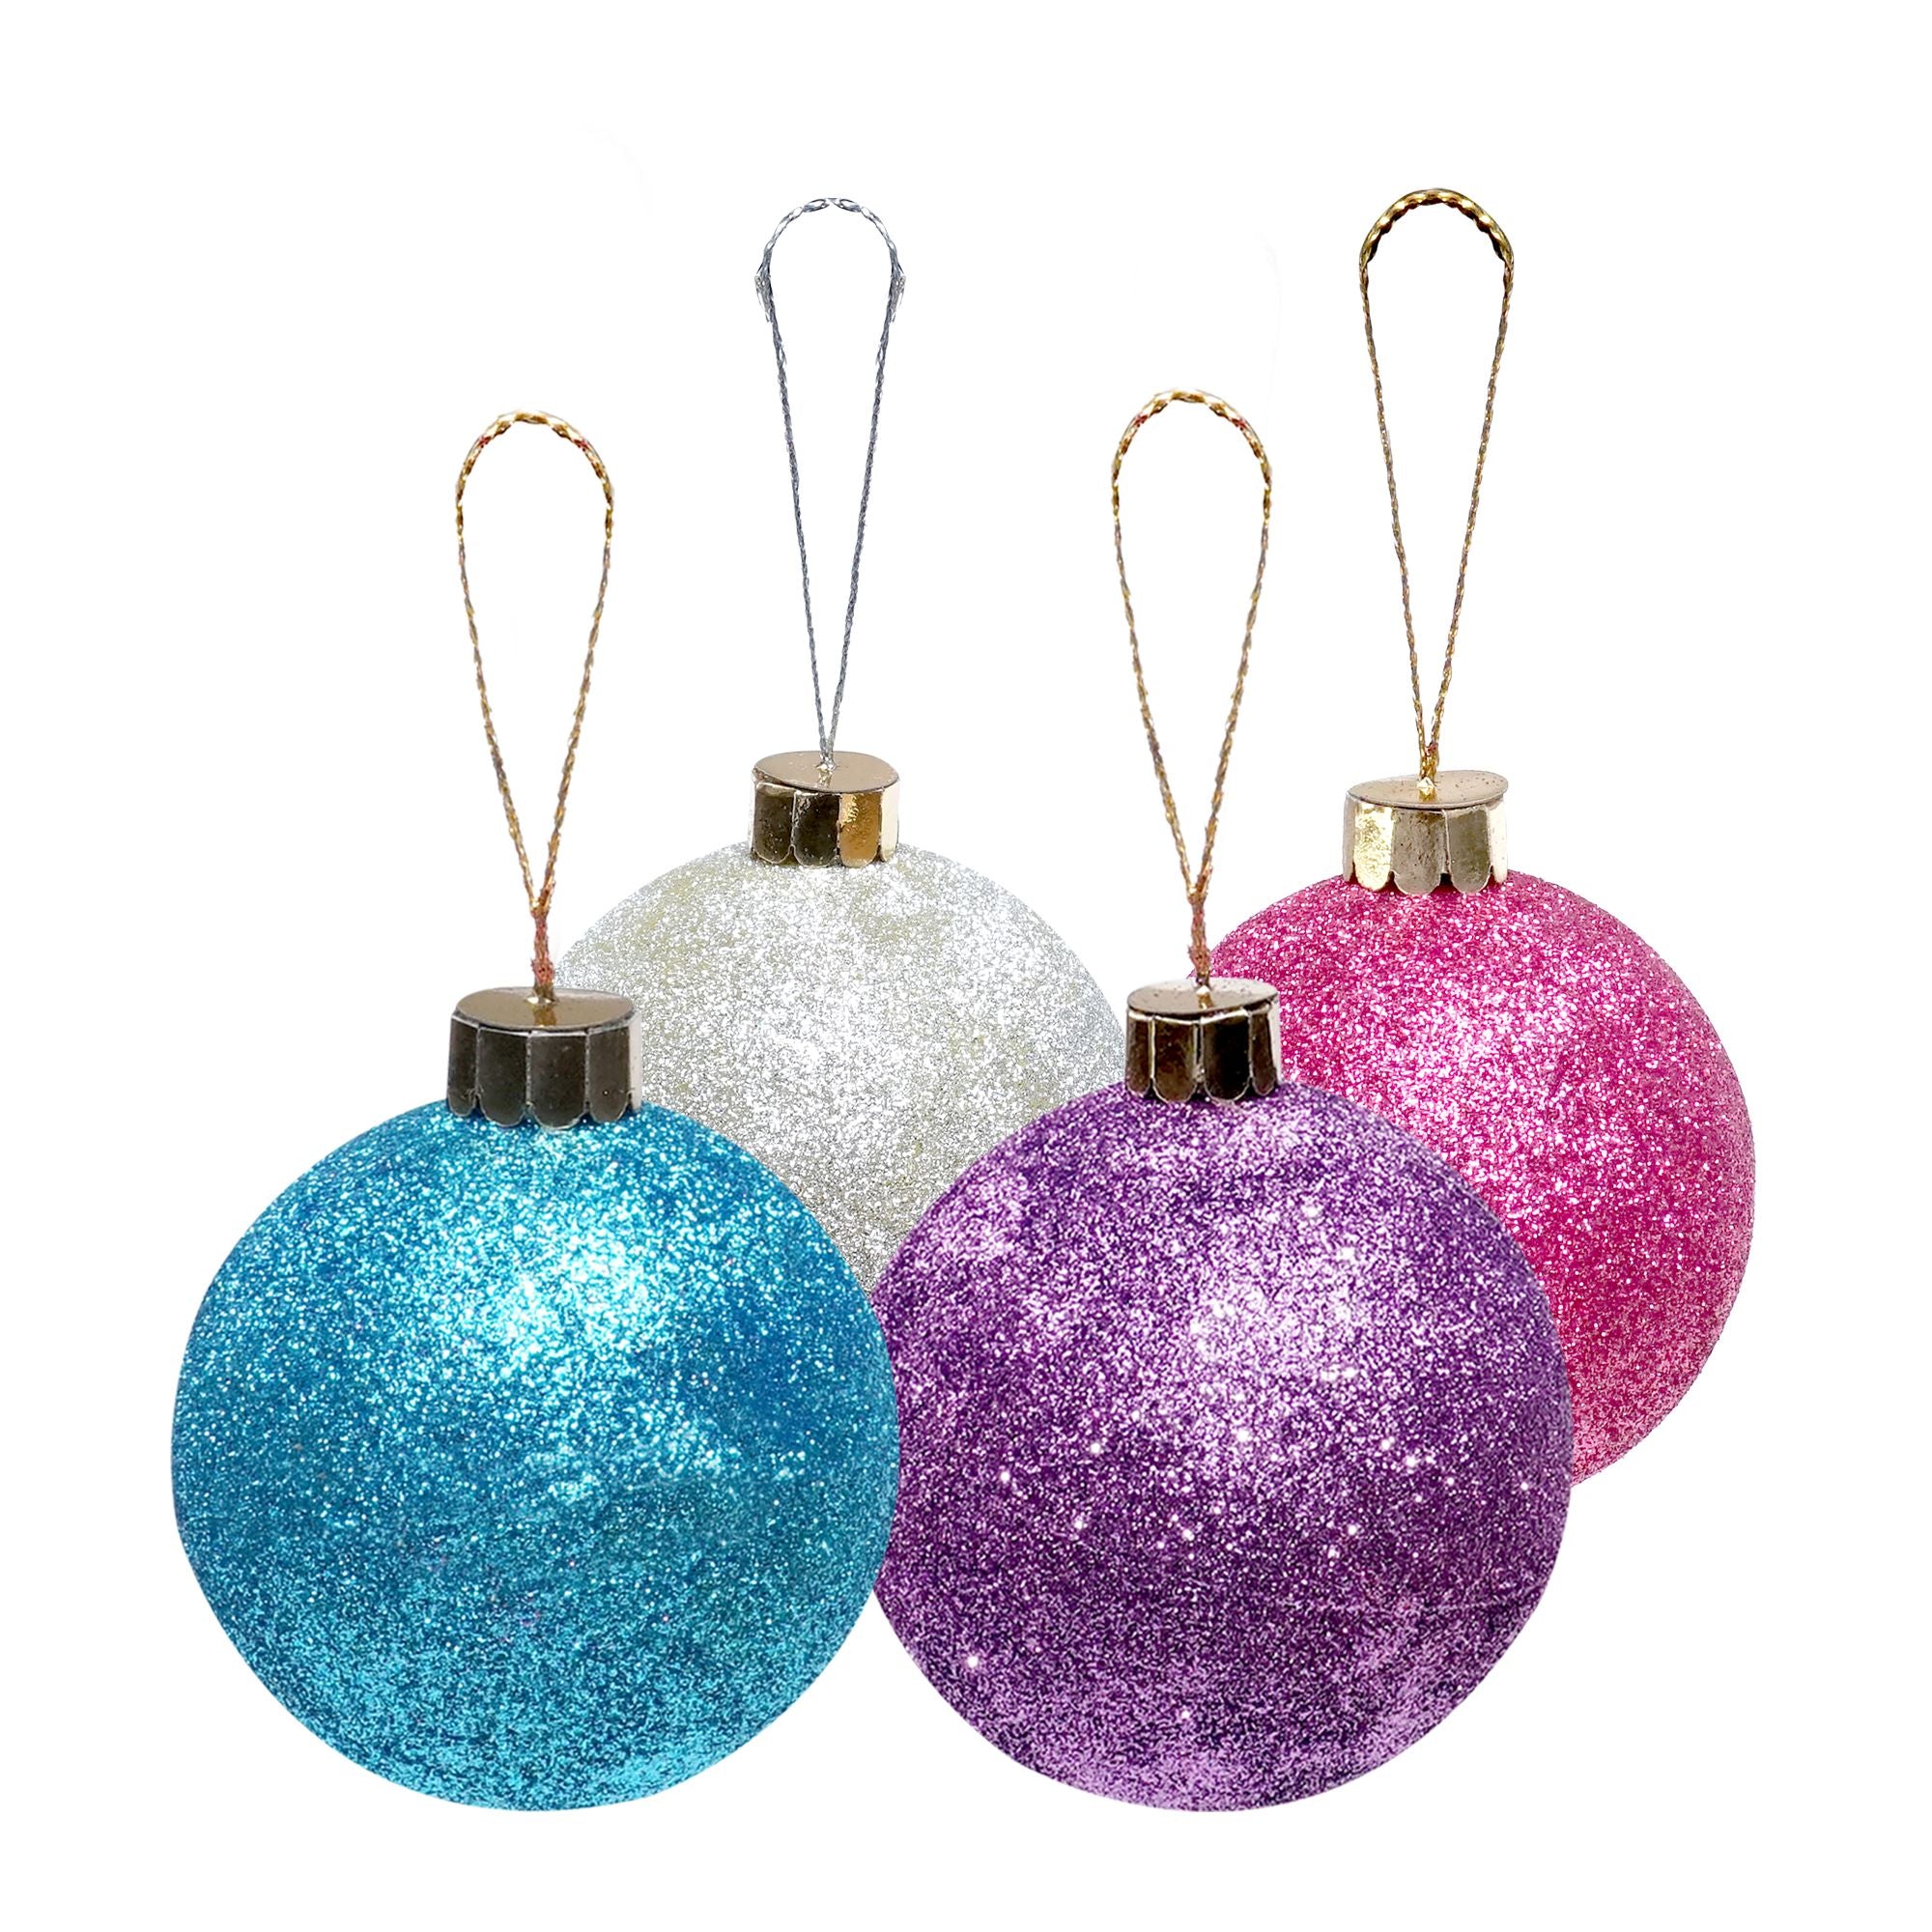 Handmade Christmas Ornaments - Glitter Baubles, 70mm, Assorted Colours - Blue, Purple, Silver, Pink, 4pc